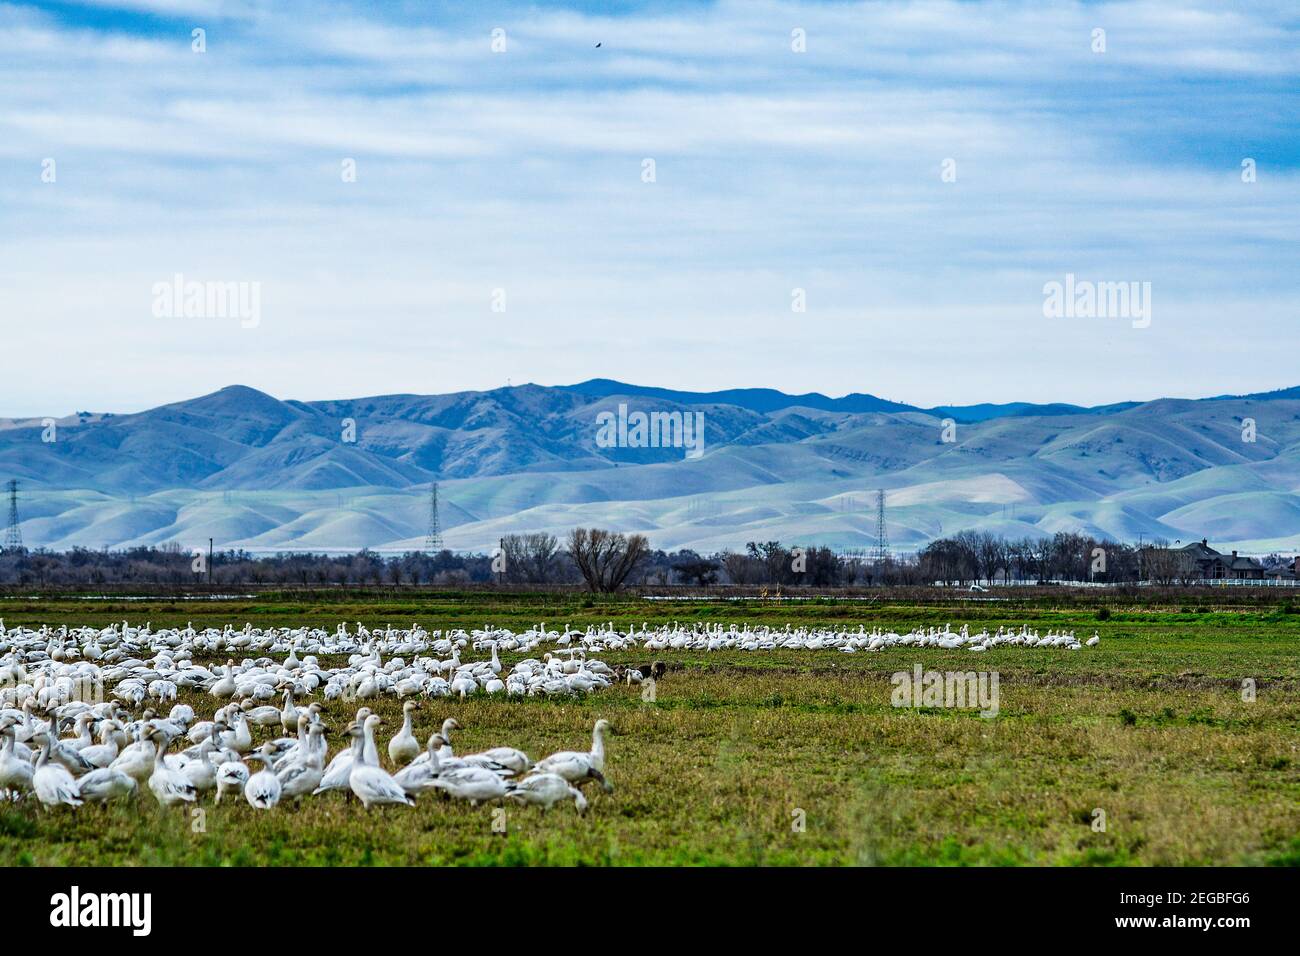 Snow and Ross's Geese graze with the Diablo mountain range in the background California USA February 2021 Stock Photo